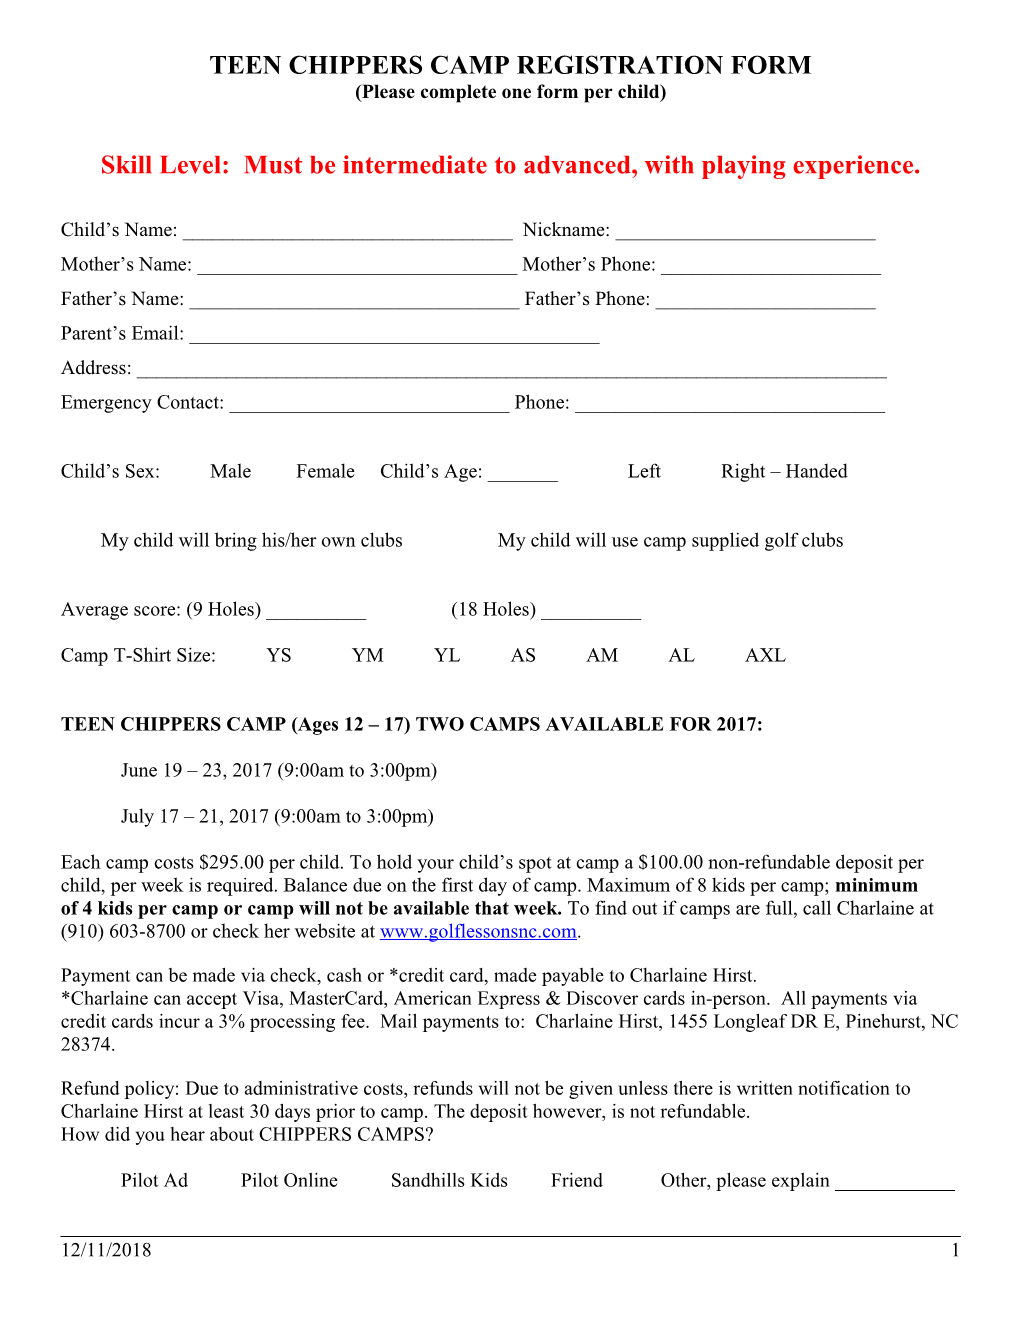 Teenchippers Camp Registration Form